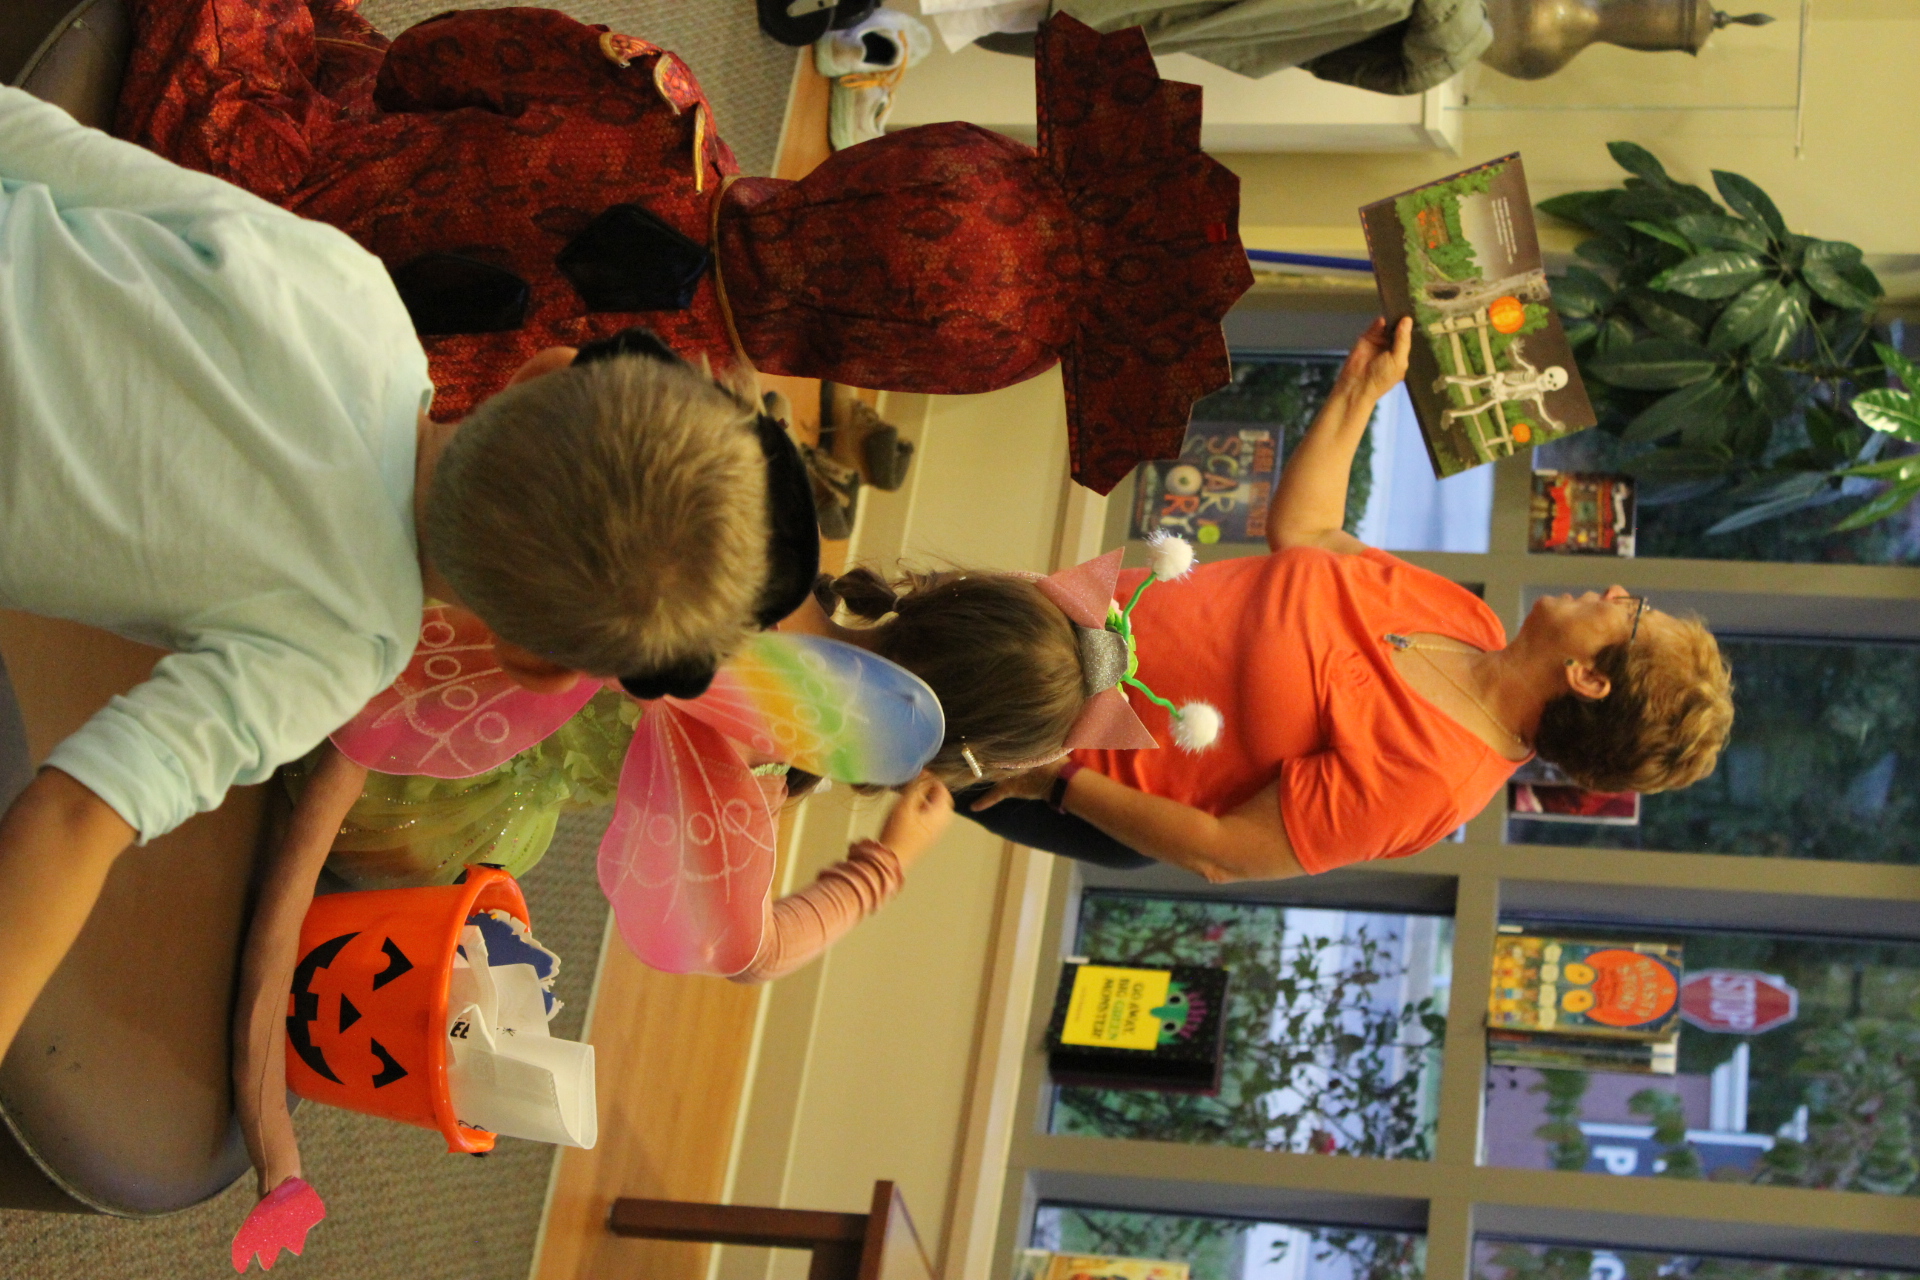 Library Assistant Director Julie reads Halloween stories to costumed children